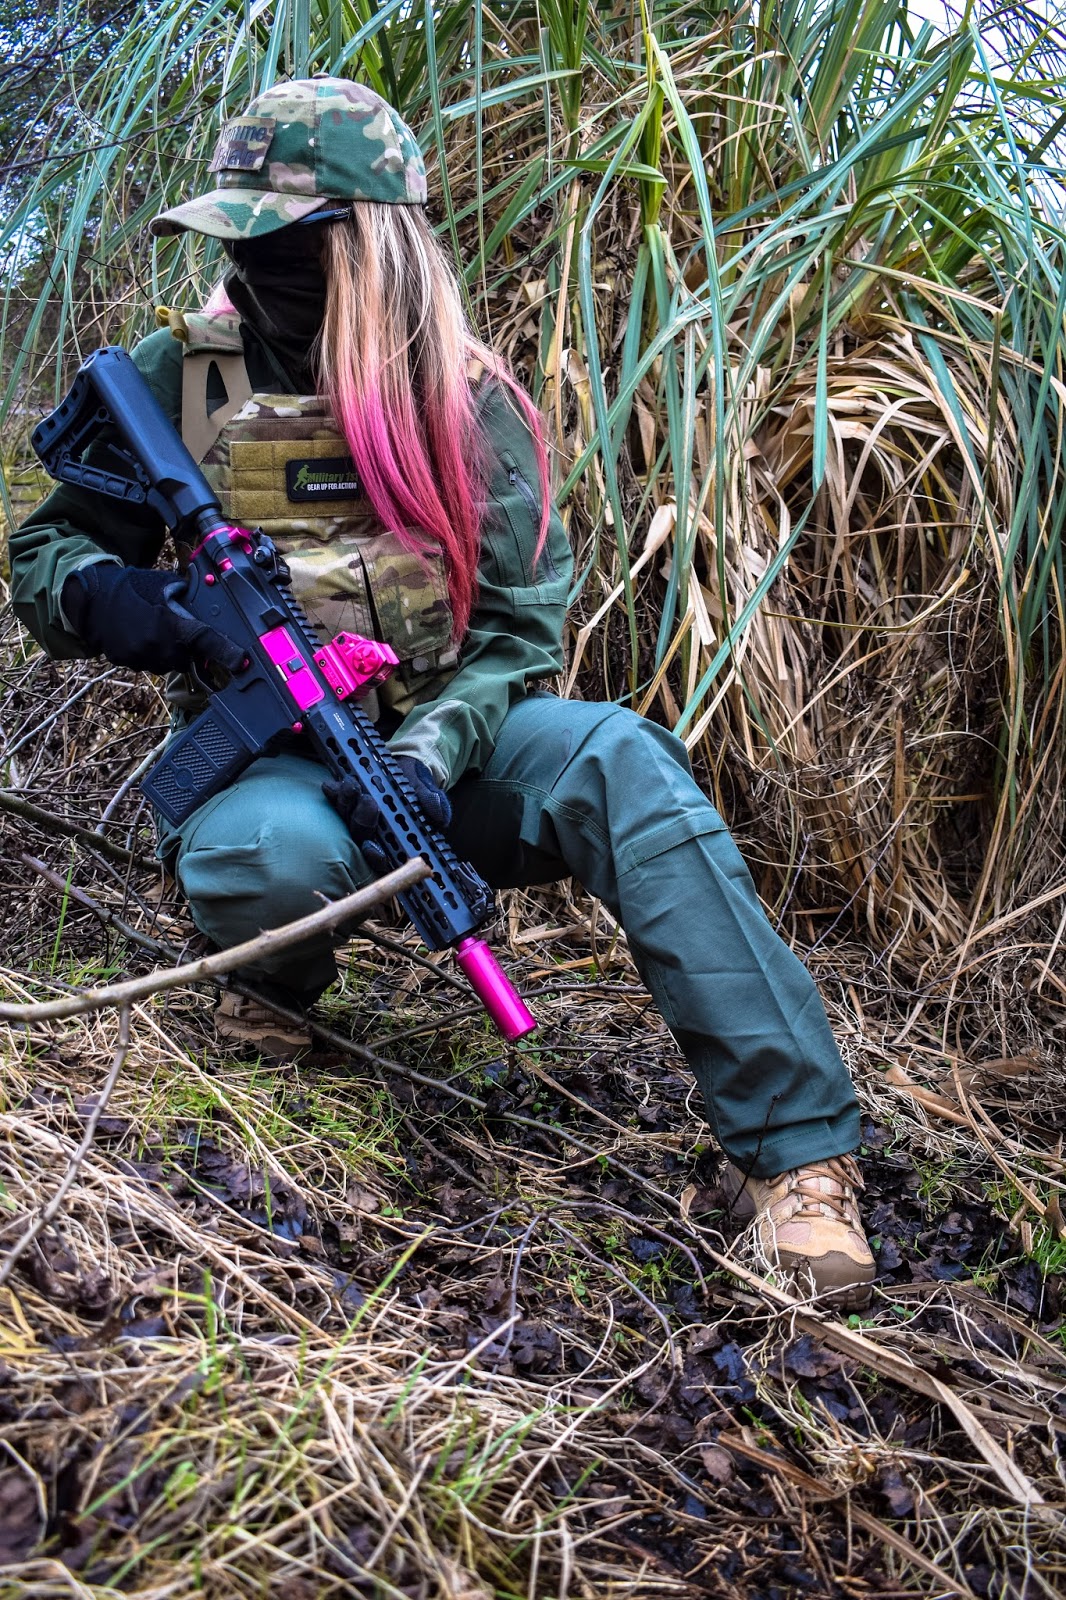 PATCH UPDATE** Hey guys! I know - Femme Fatale Airsoft